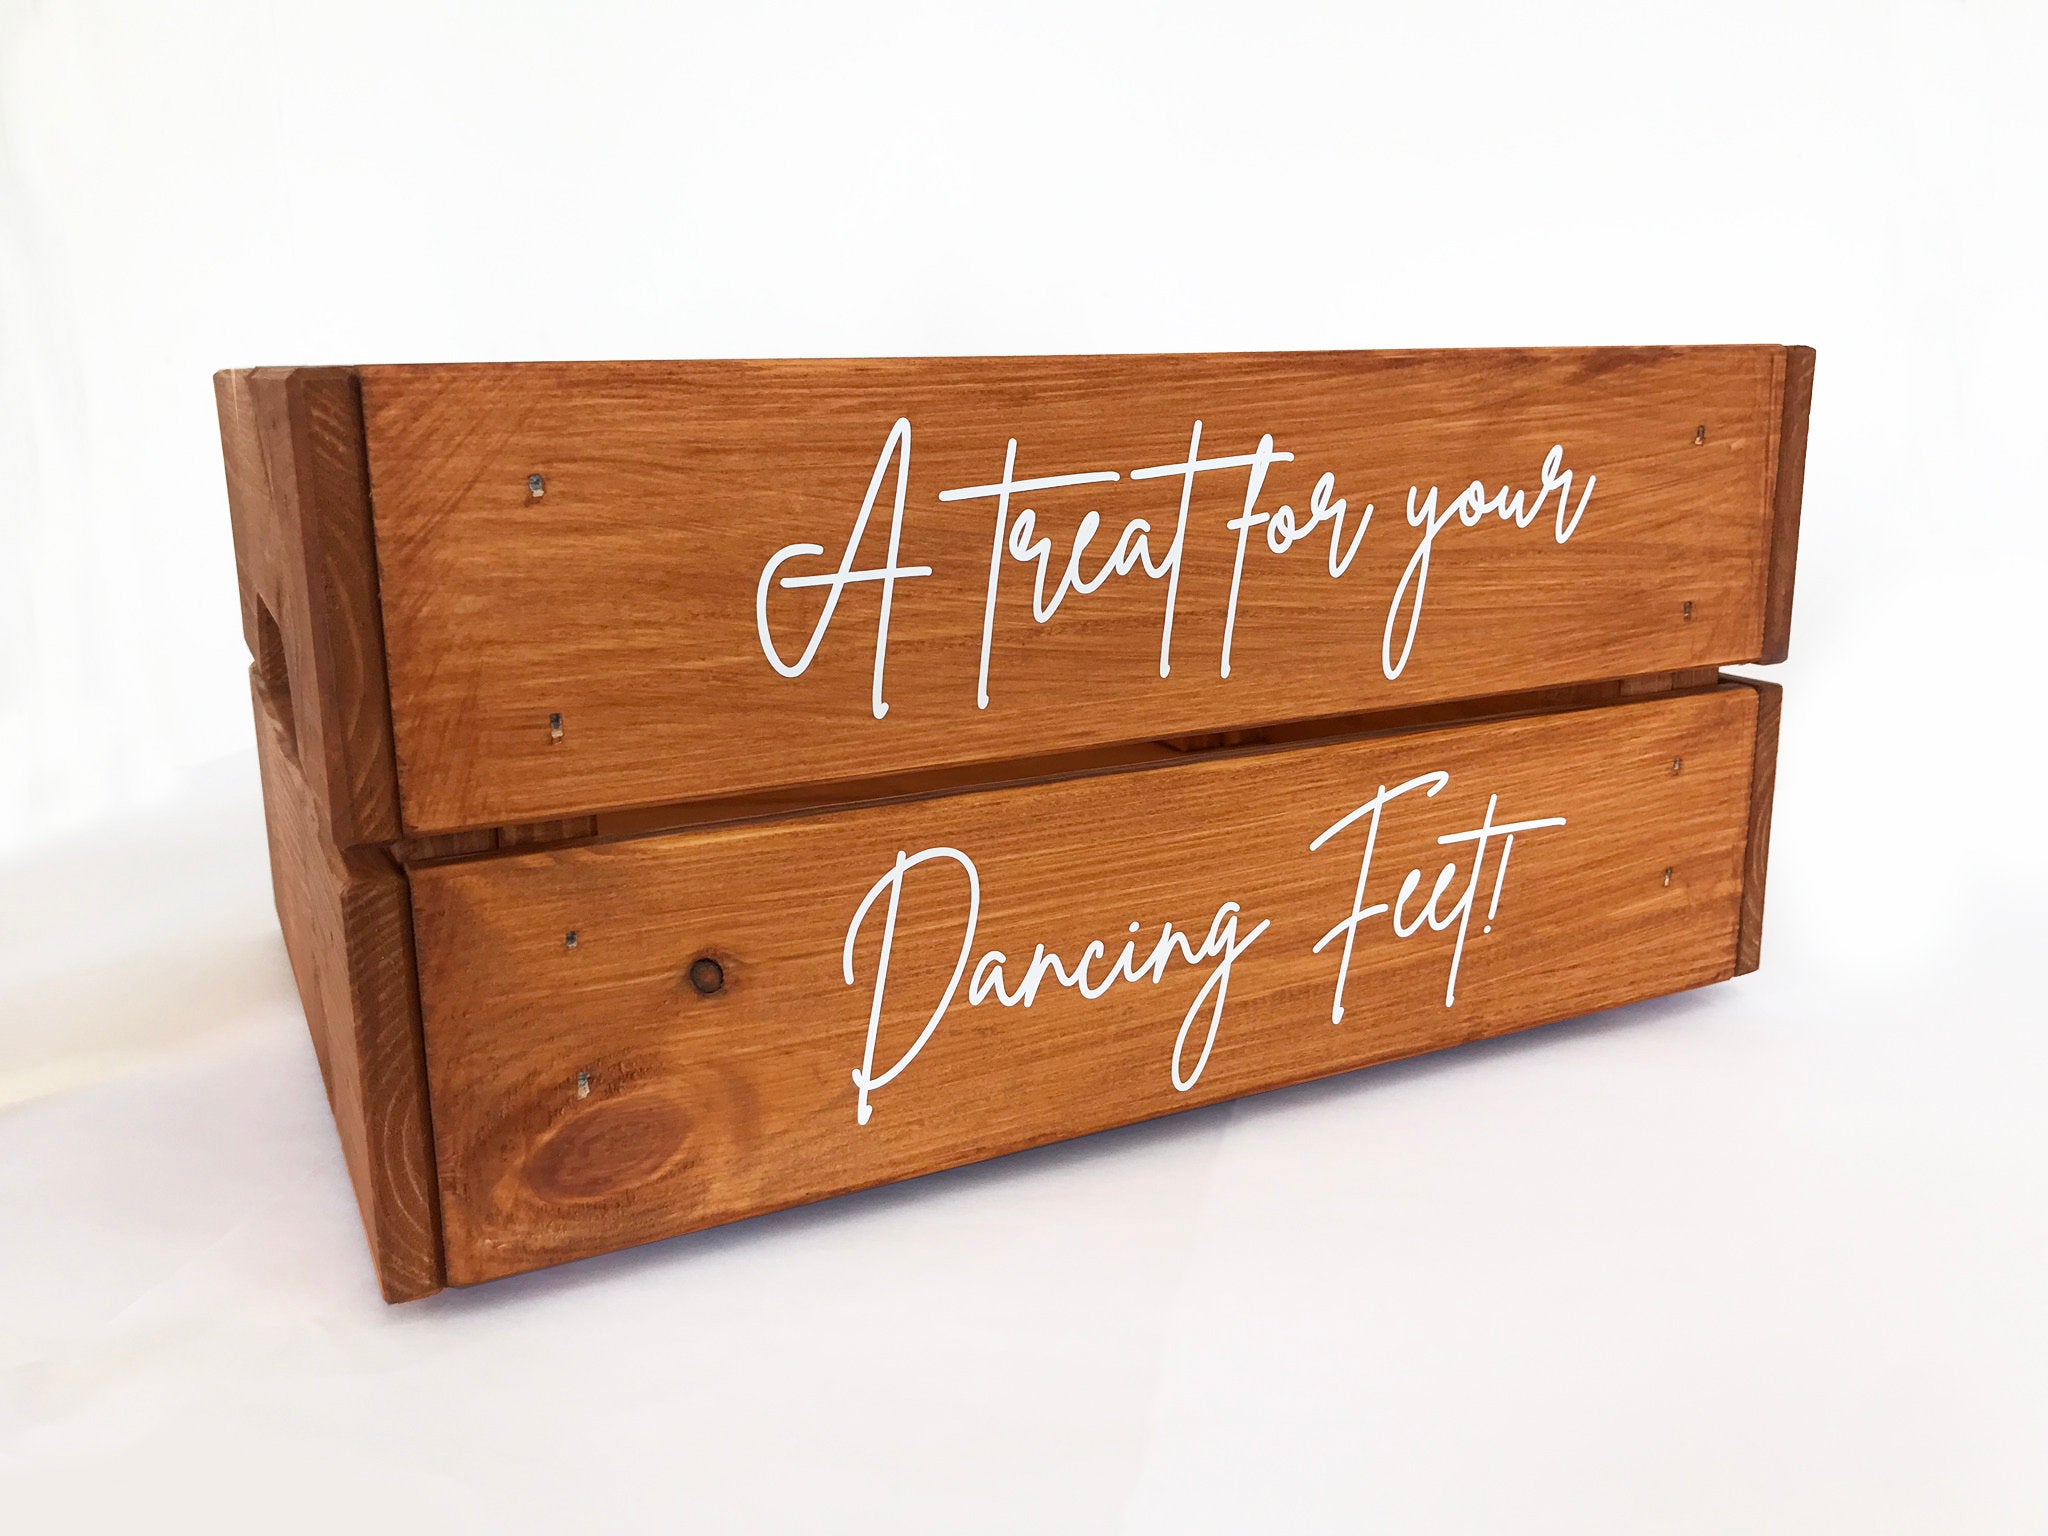 A Treat For Your Dancing Feet Wedding crate